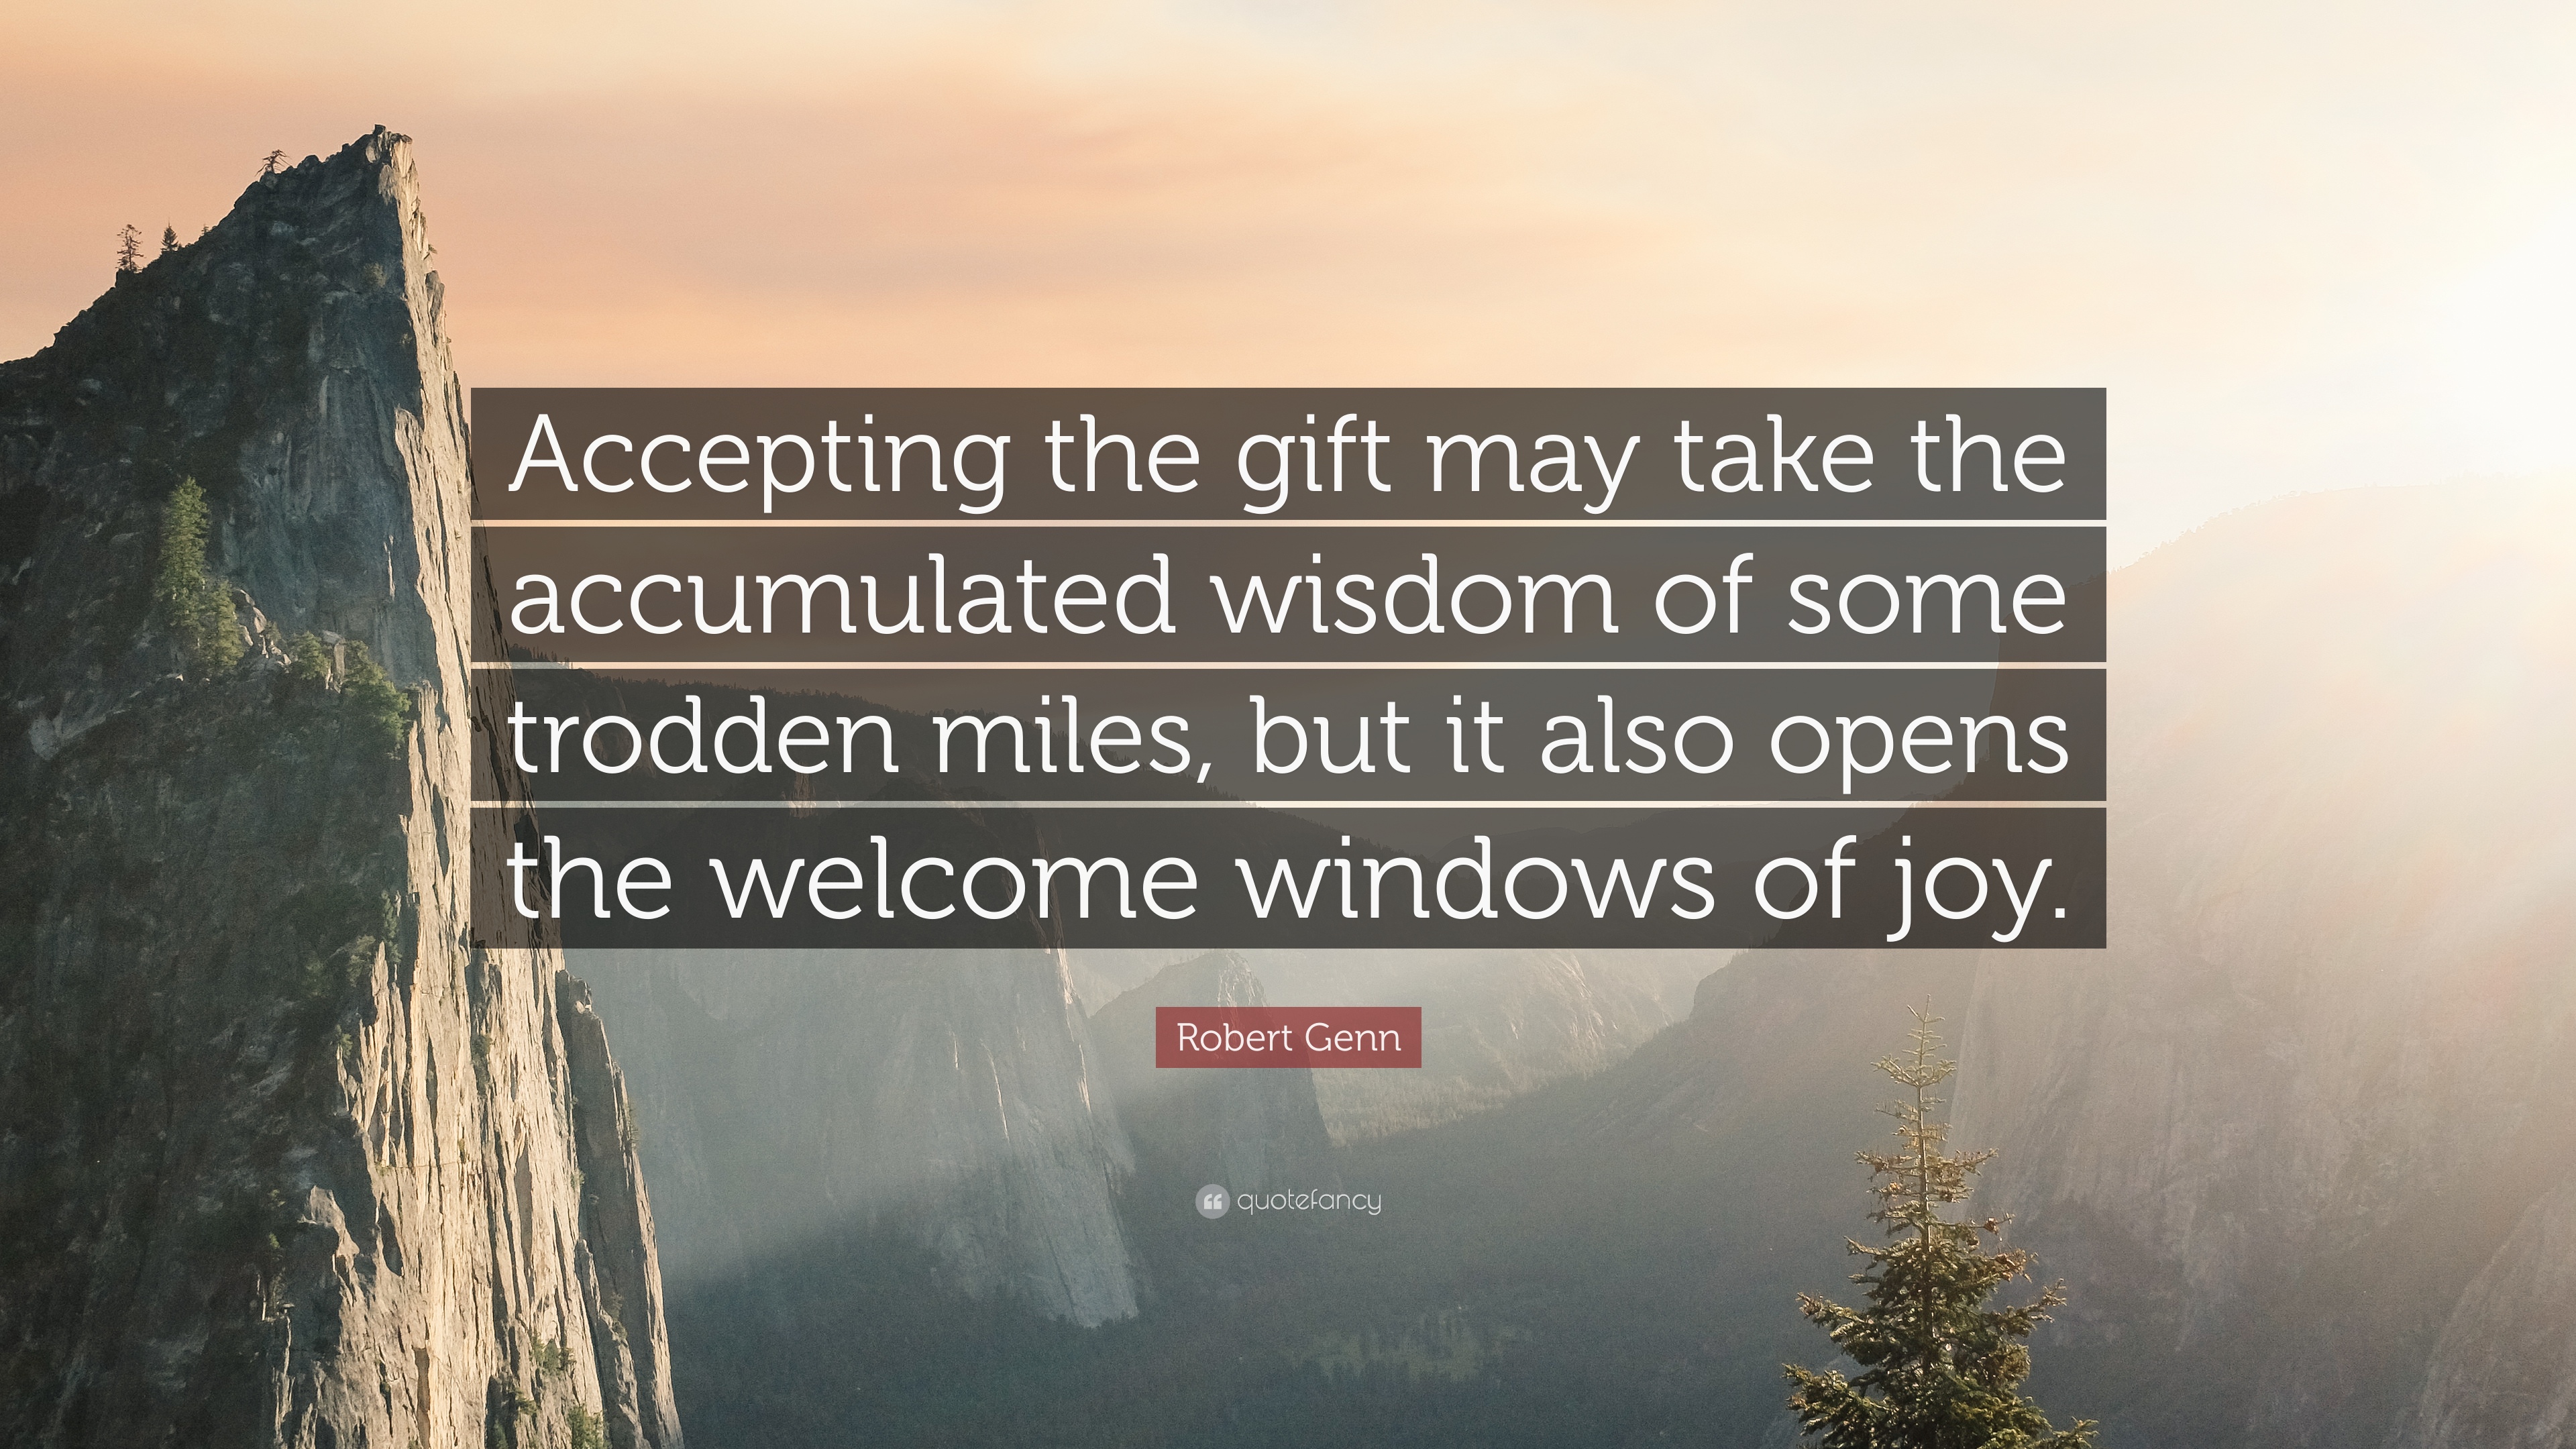 Robert Genn Quote: “Accepting the gift may take the accumulated ...